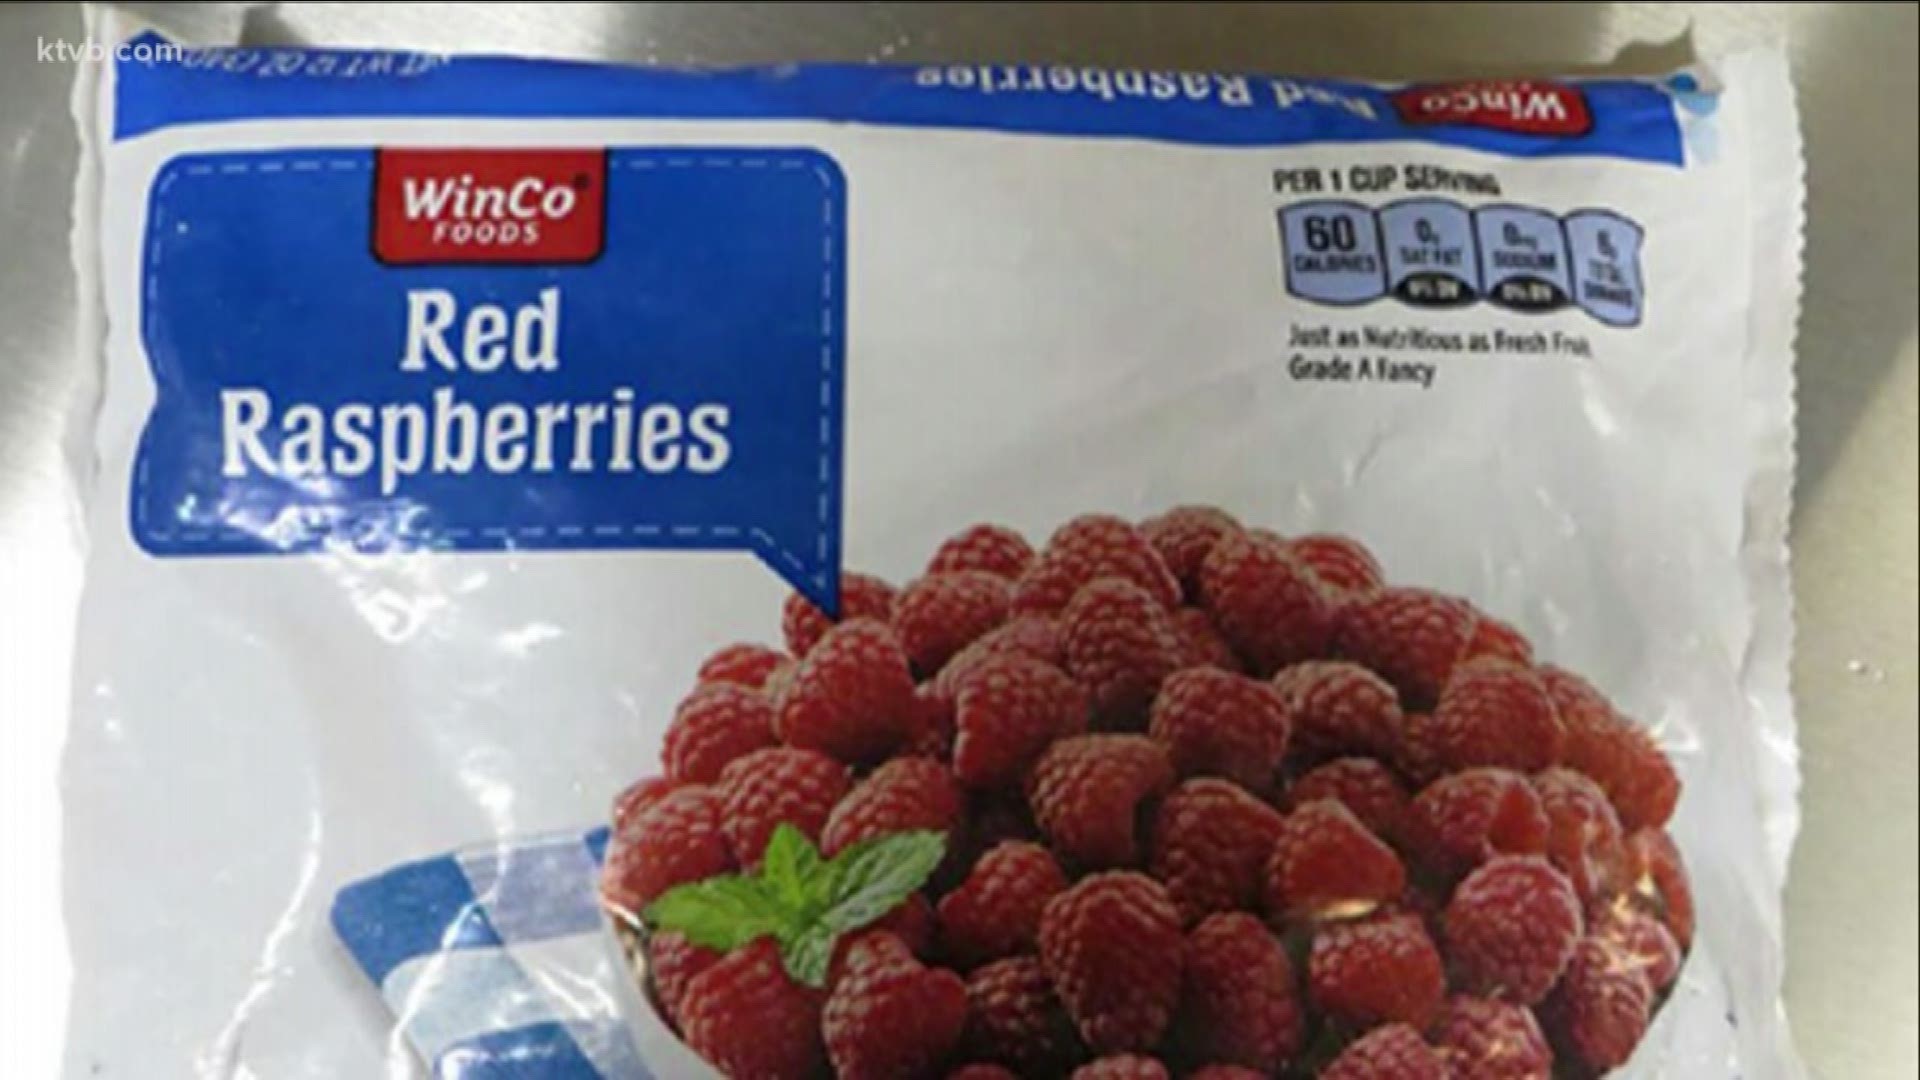 Although there have been no reports of sickness, all of the remaining recalled products have been pulled from the shelves. Anyone who bought the affected bagged berries can bring it in to their local WinCo for a full refund or replacement.